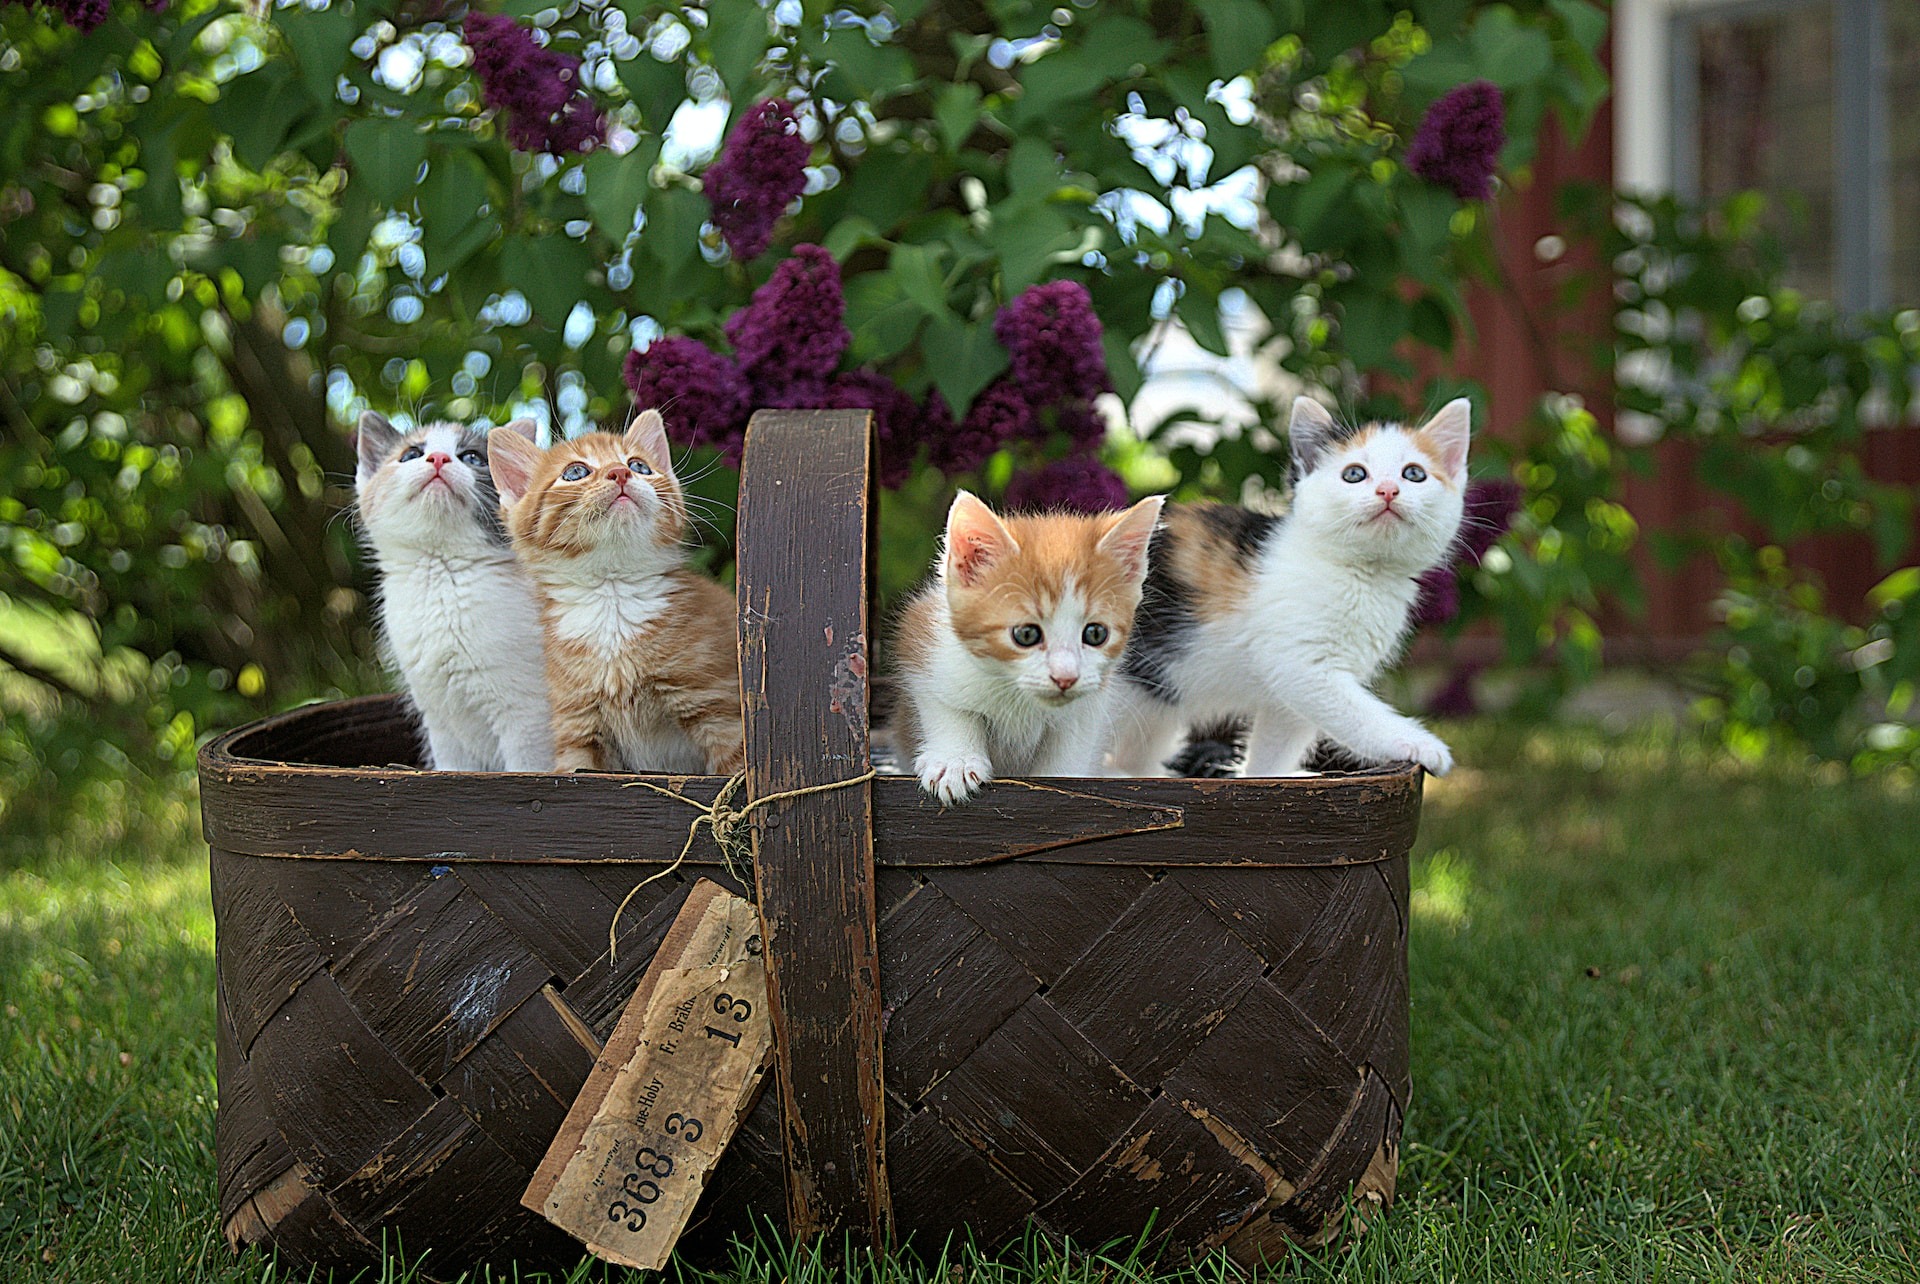 5 Tips to caring for your kittens